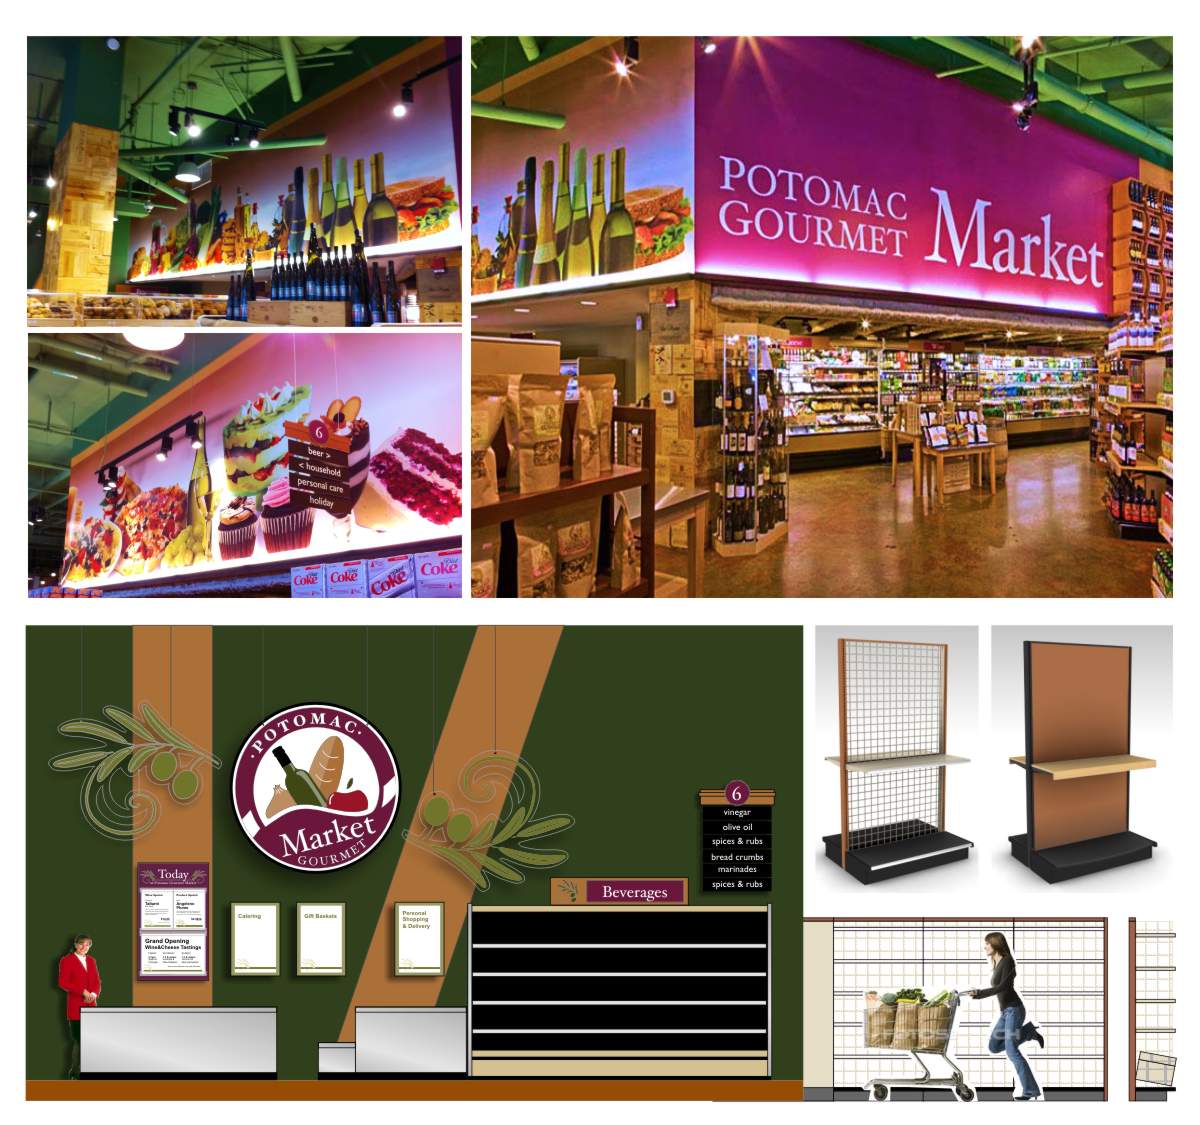 Photos showing interior design elements, grand format printed photo wall murals of food still life imagery, composite elevation of branded graphic elements in context and Lozier grocery display shelving fixtures. Design by Mark Ksiazewski at Centre Street Creative 